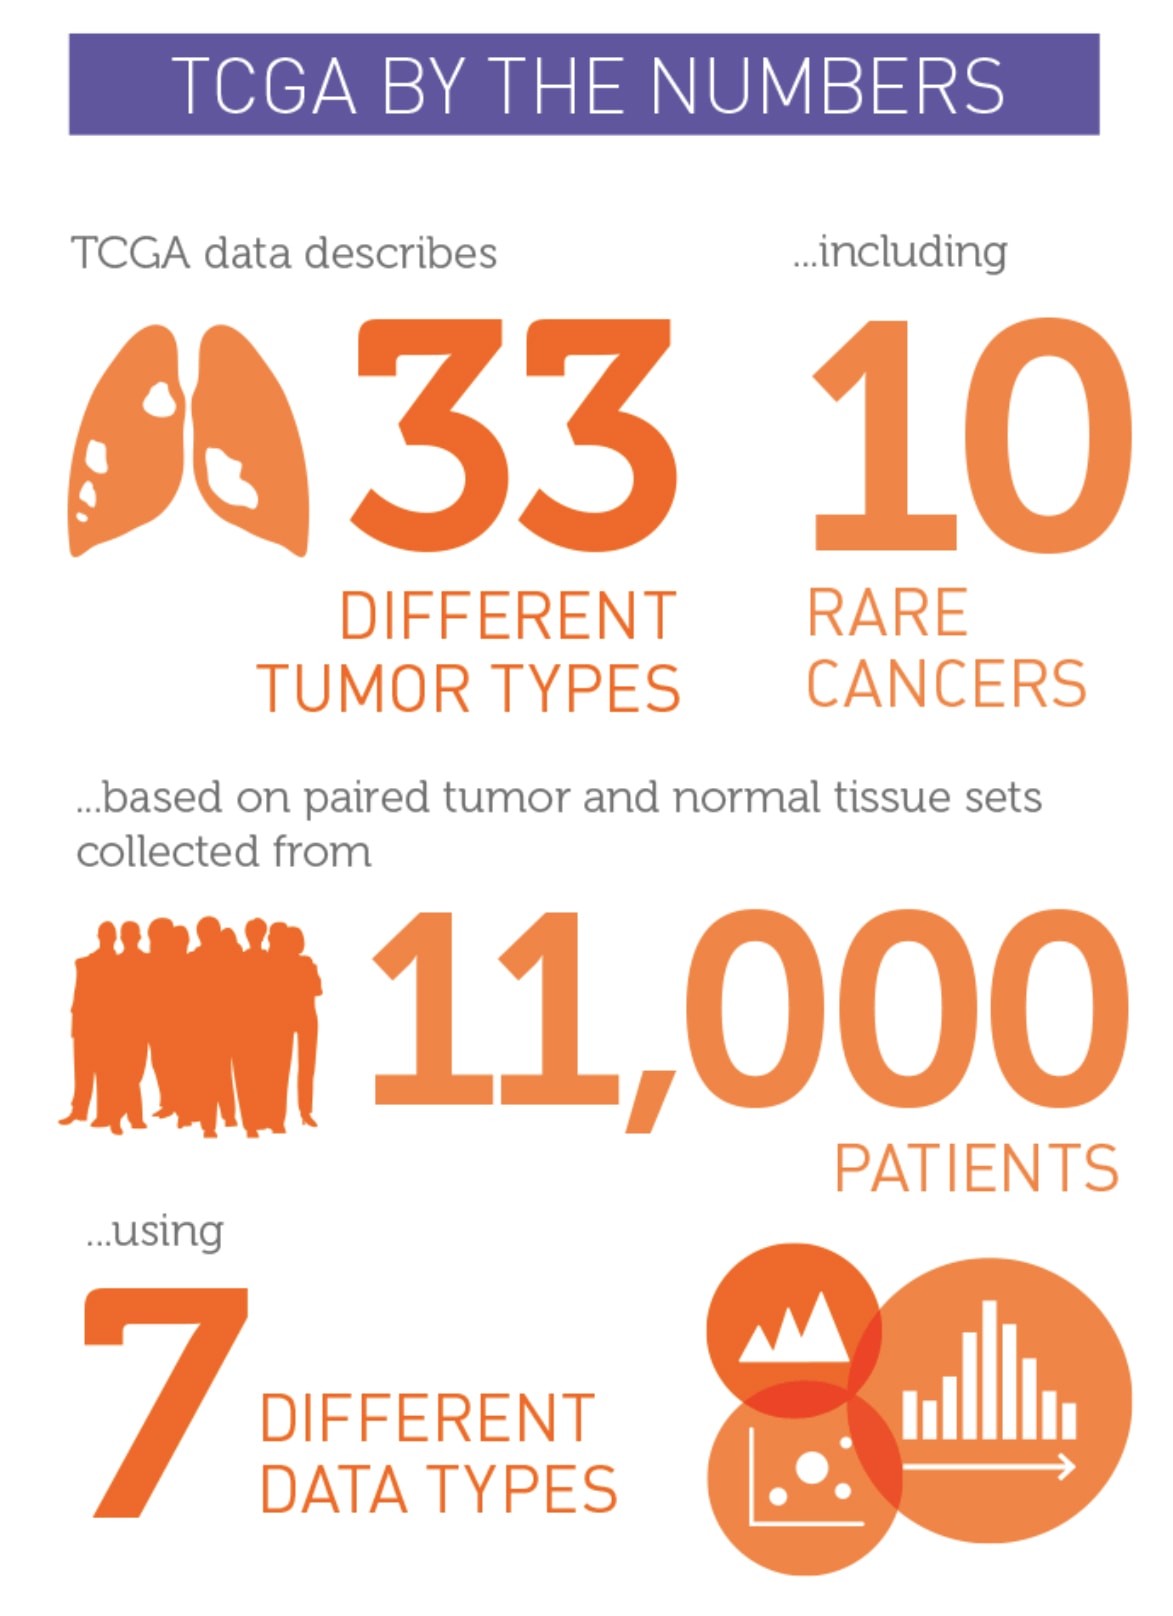 TCGA By the Numbers:  33 Different Tumor Types, 10 Rare Cancers, 11,000 patients, 7 different data types